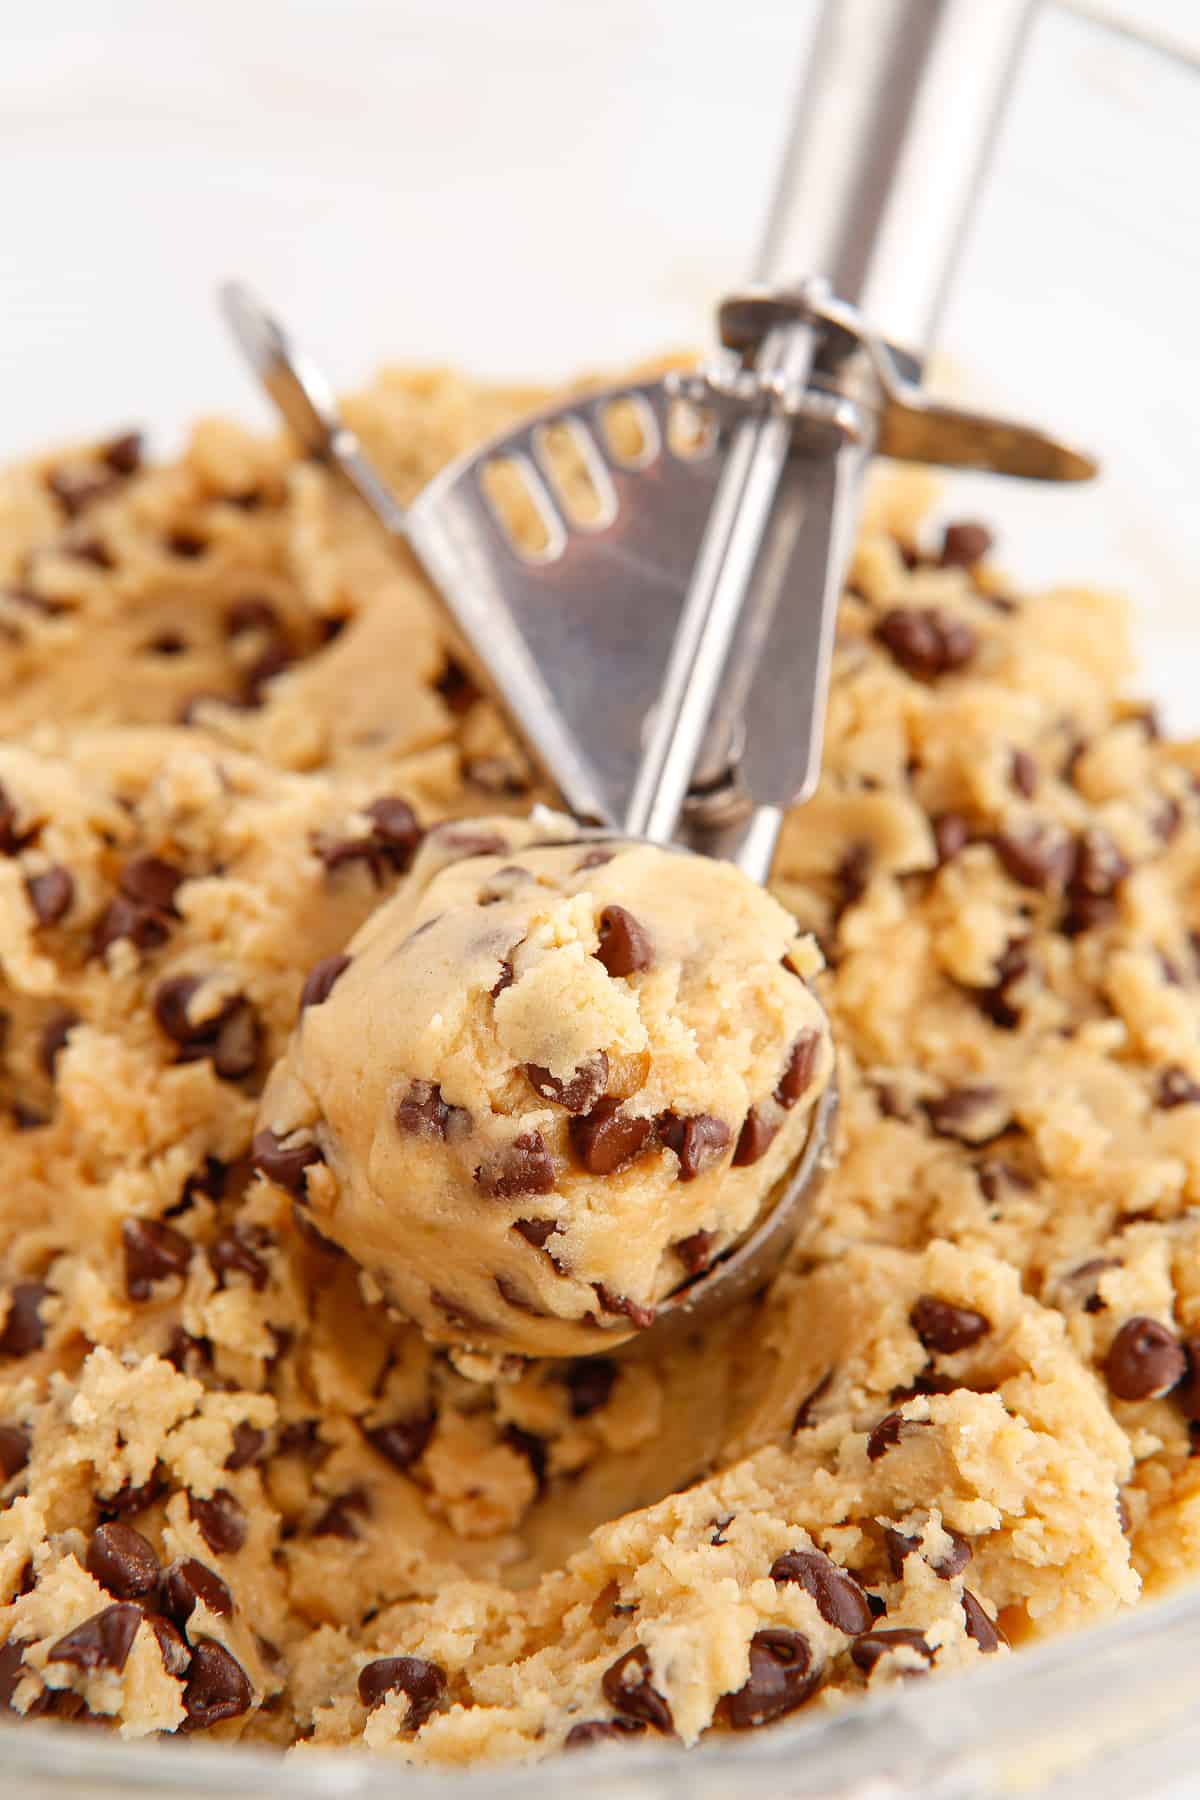 Cookie scoop scooping up cookie dough with mini chocolate chips.